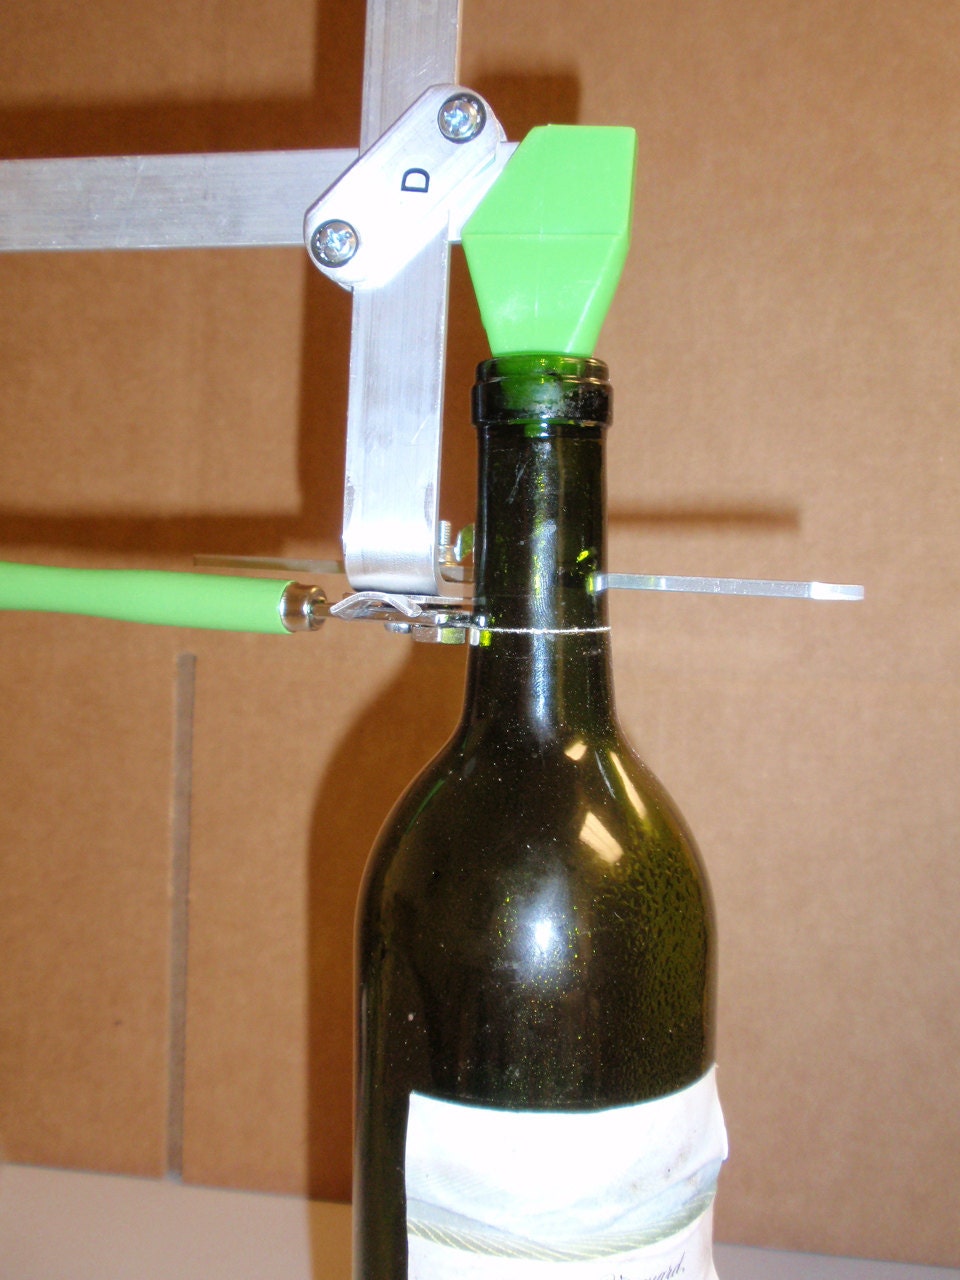 How to Cut a Wine Bottle — KnowWines